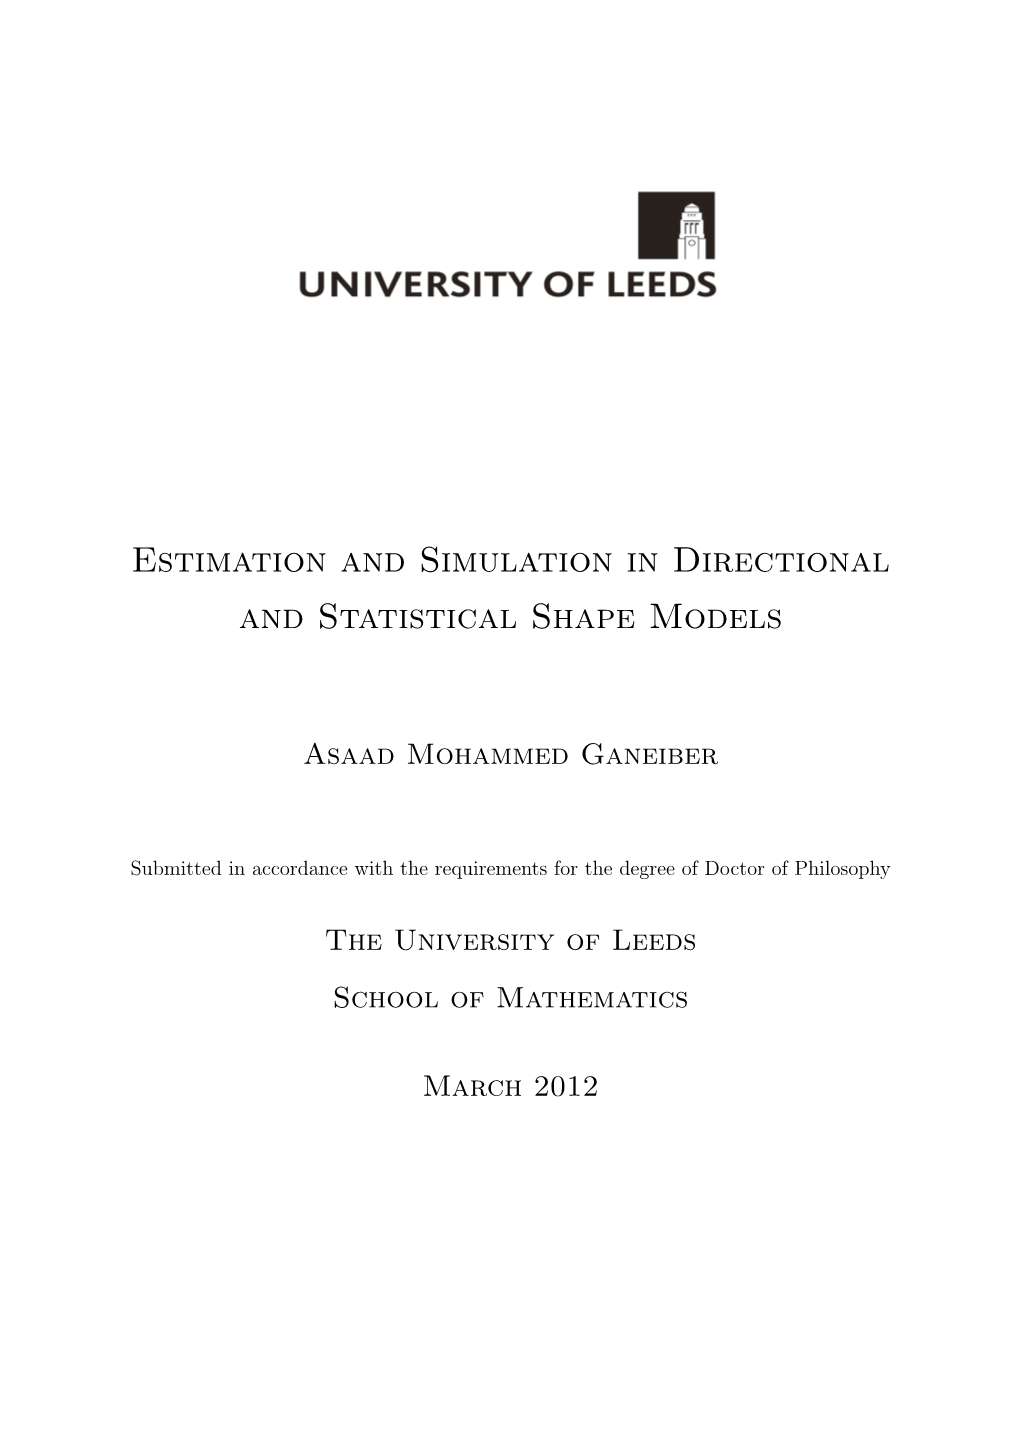 Estimation and Simulation in Directional and Statistical Shape Models